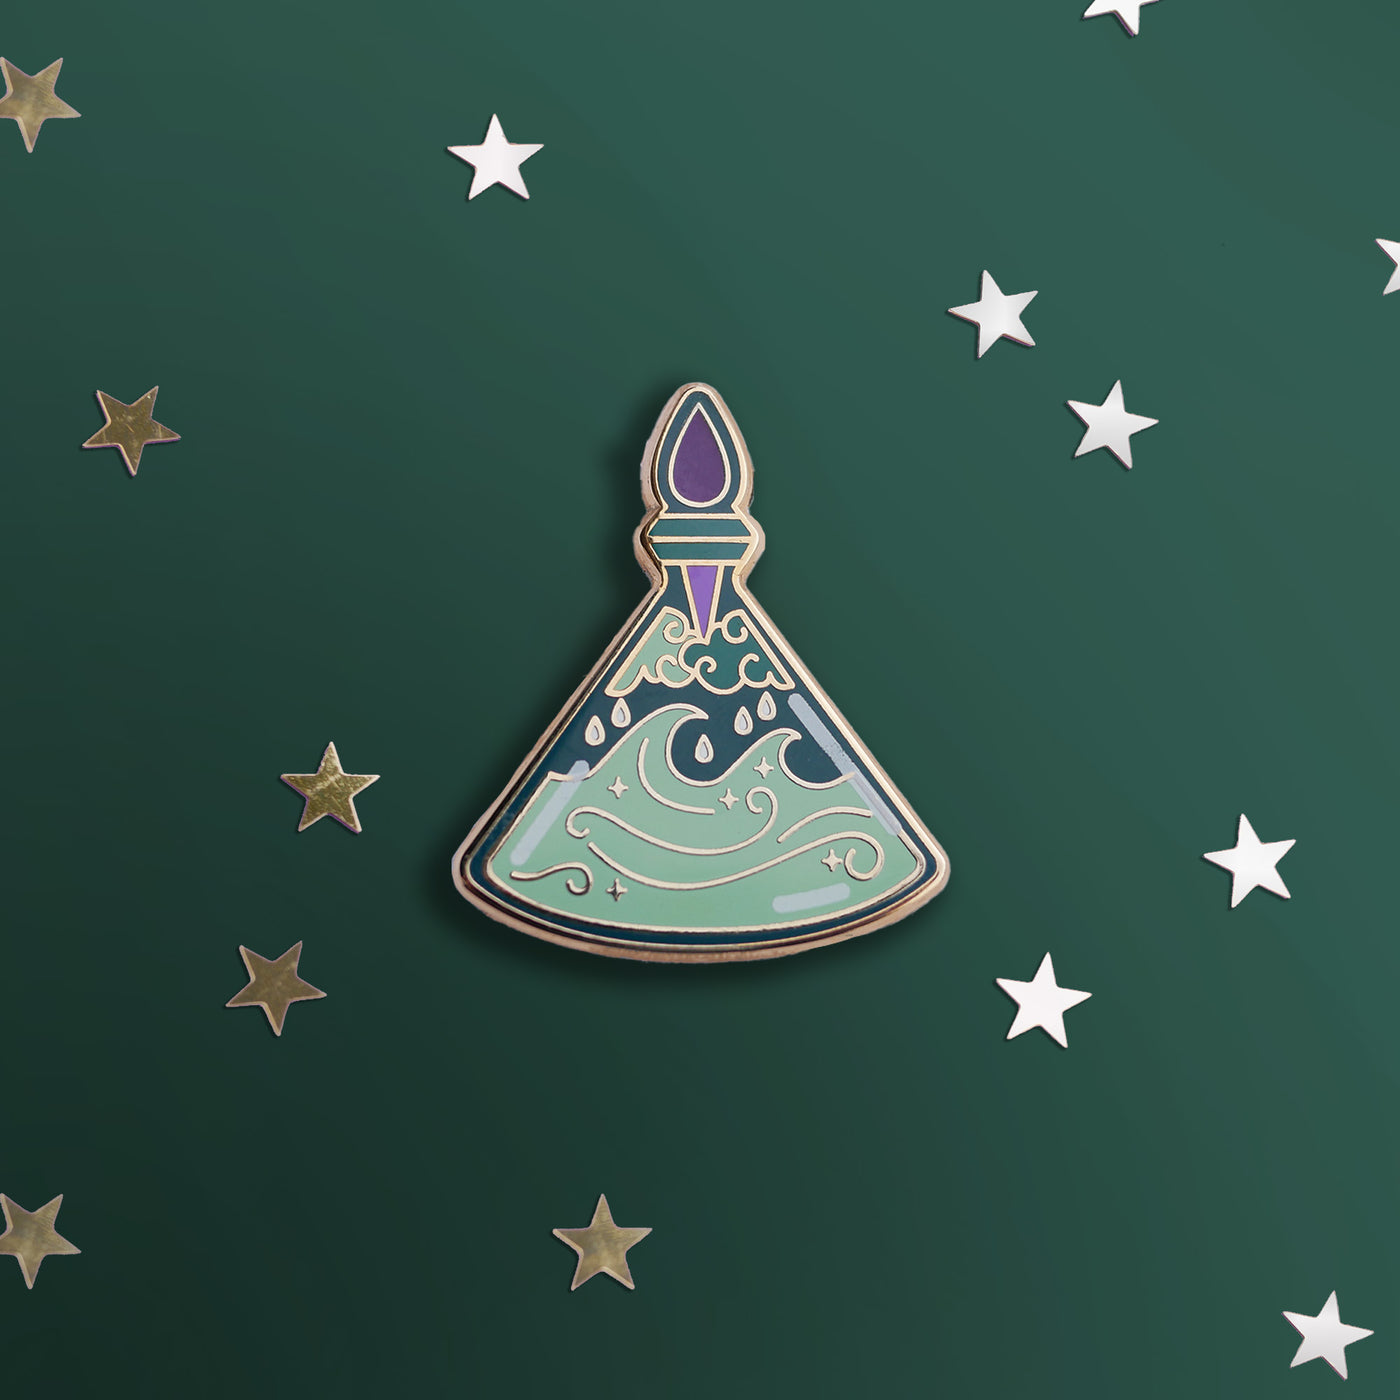 Calling Potion Bottle - Enamel Pin - The Quirky Cup Collective